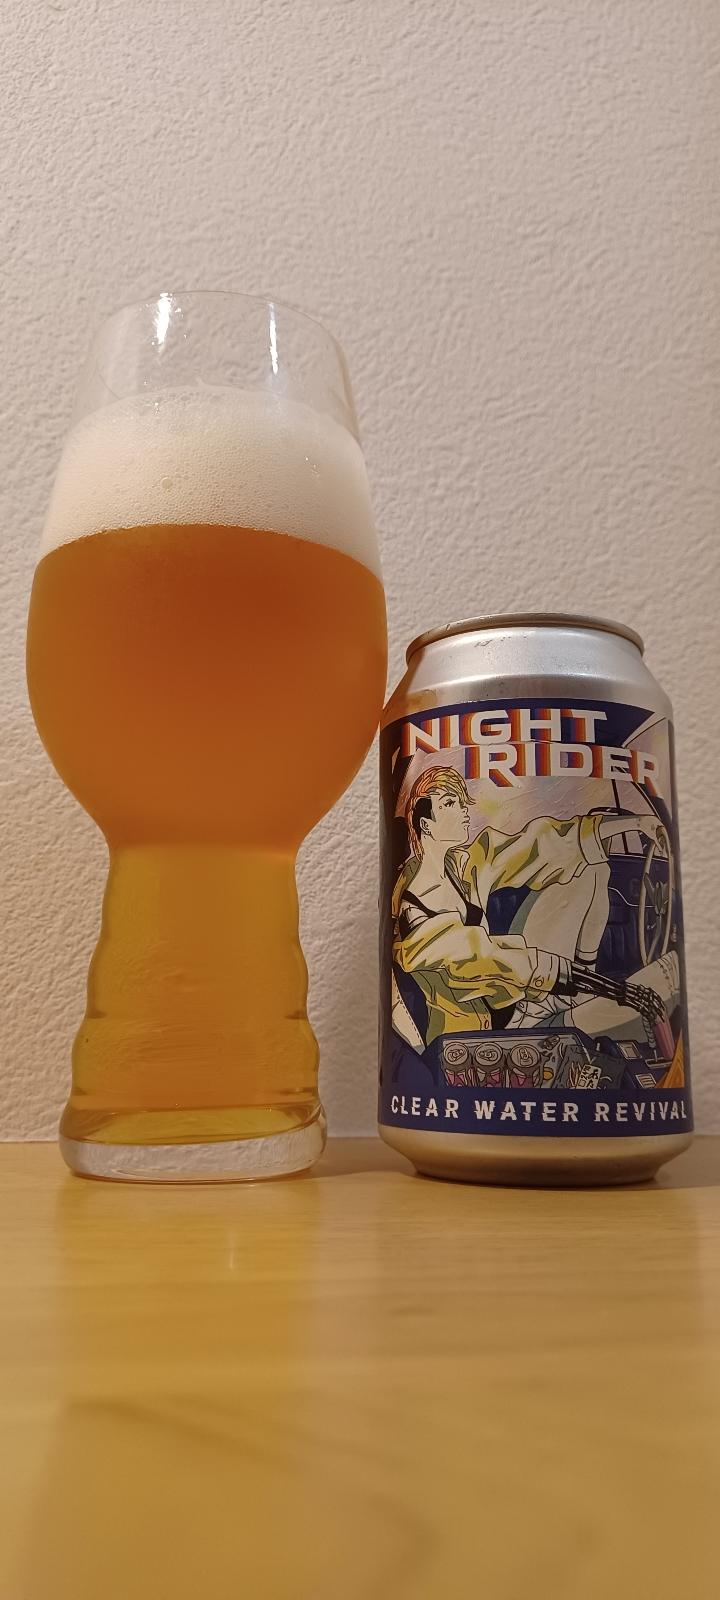 Night Rider - Clear Water Revival